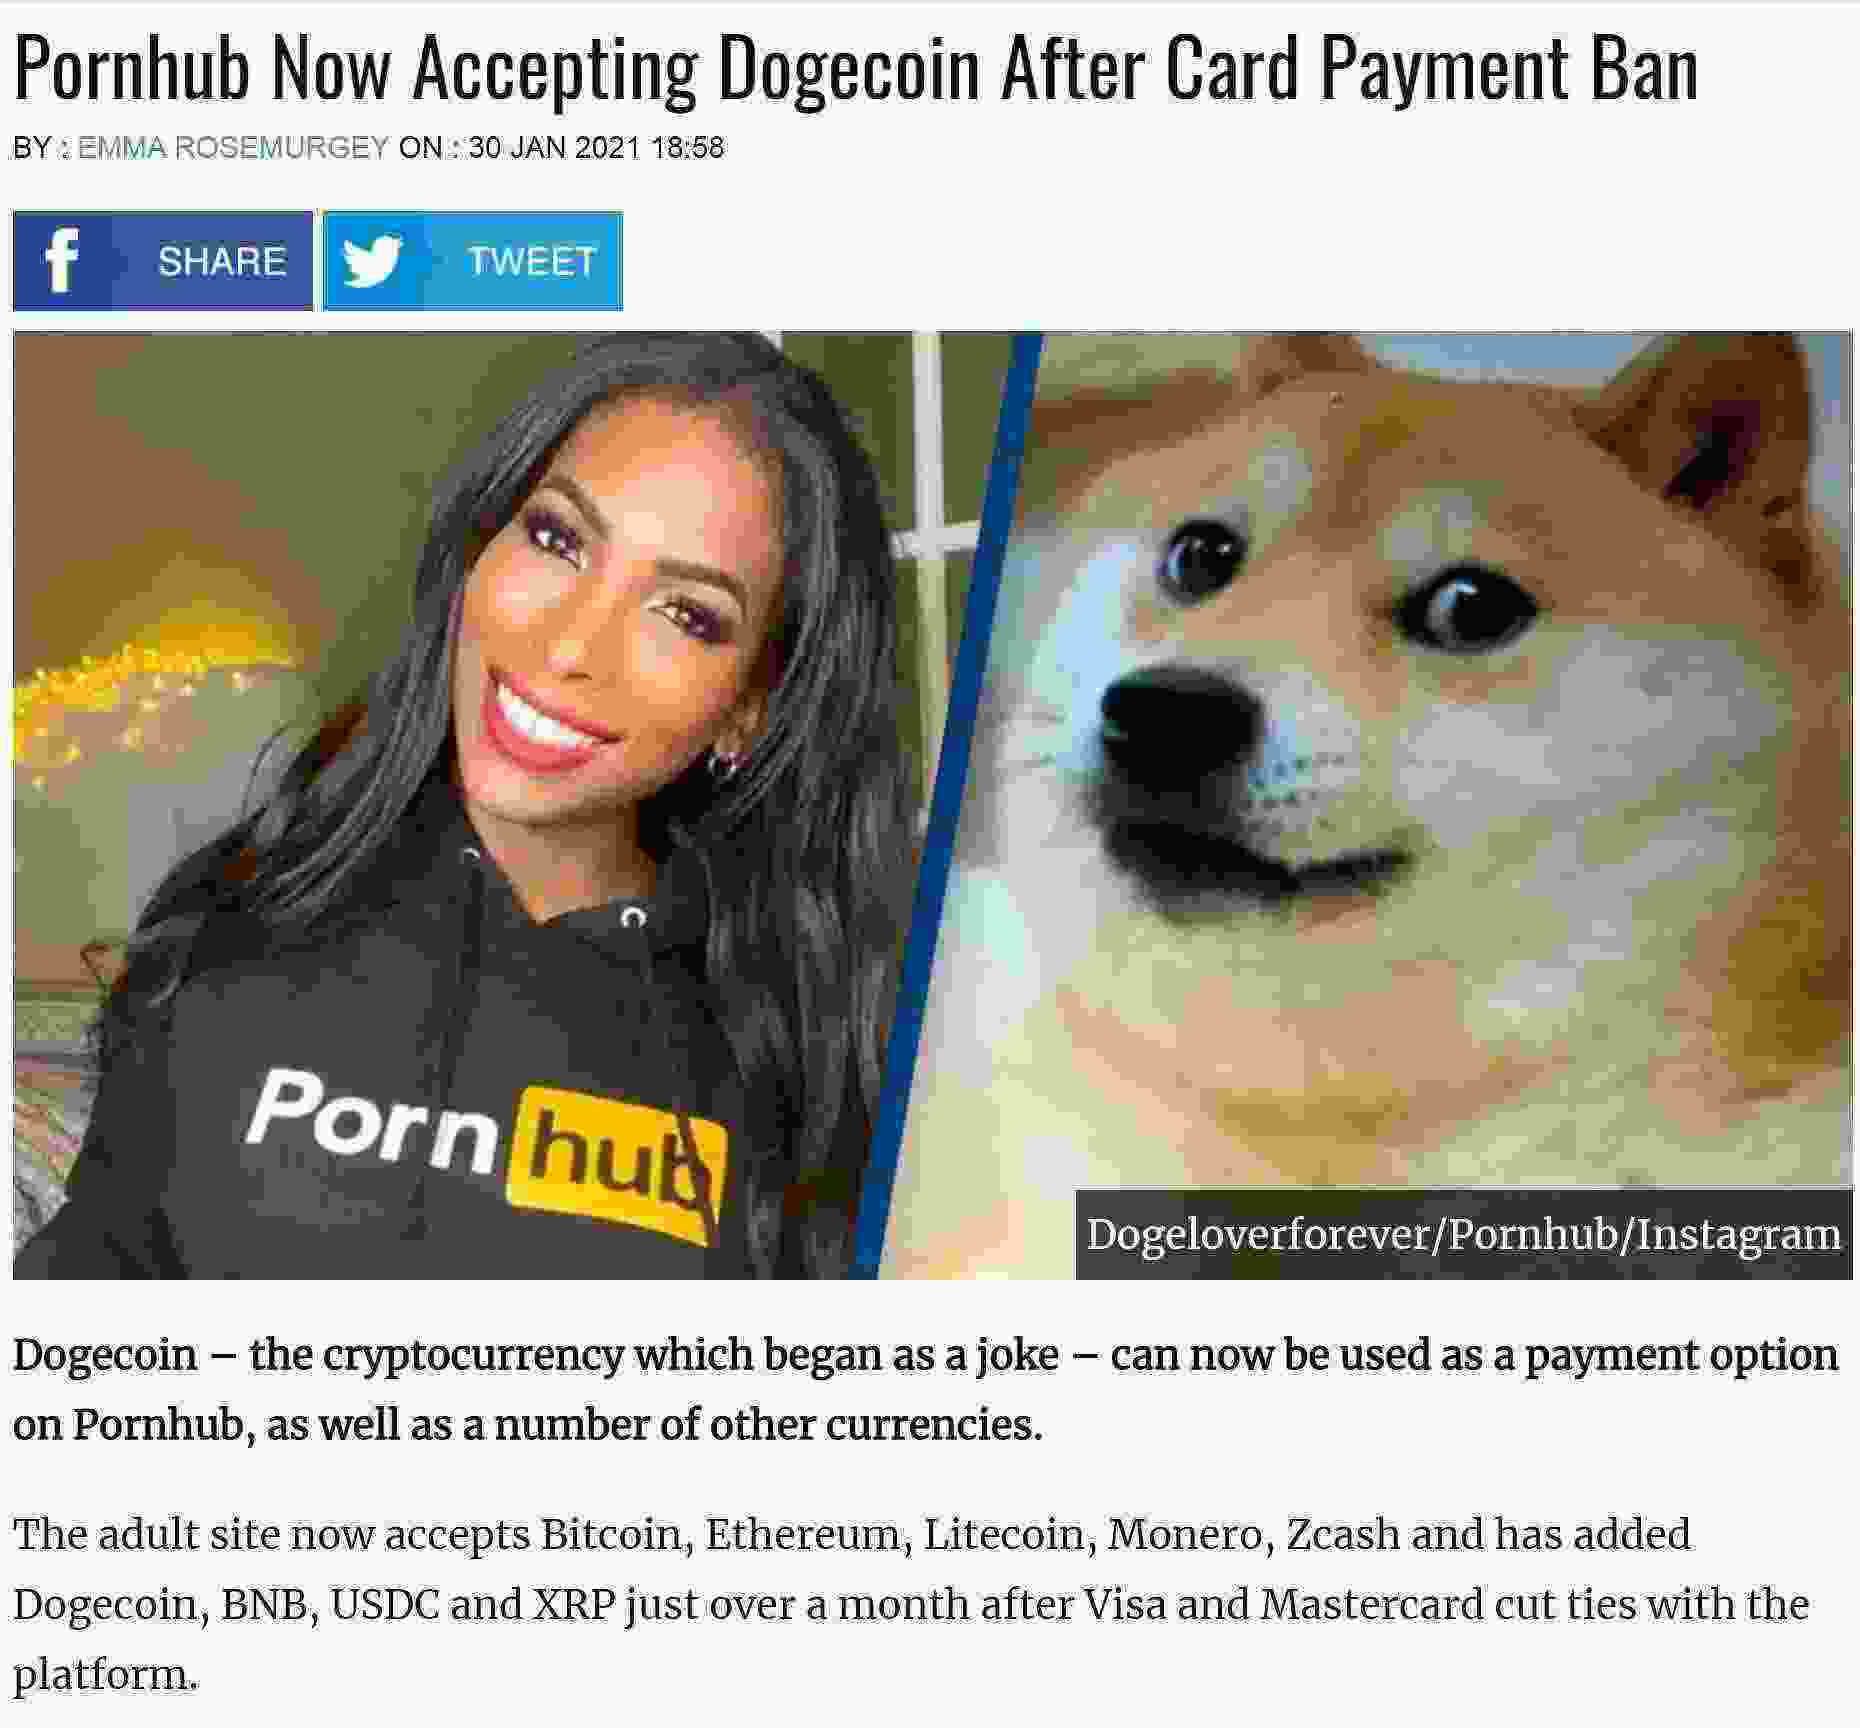 Pornhub-Now-Accepting-Dogecoin-After-Card-Payment-Ban-UNILAD.jpg